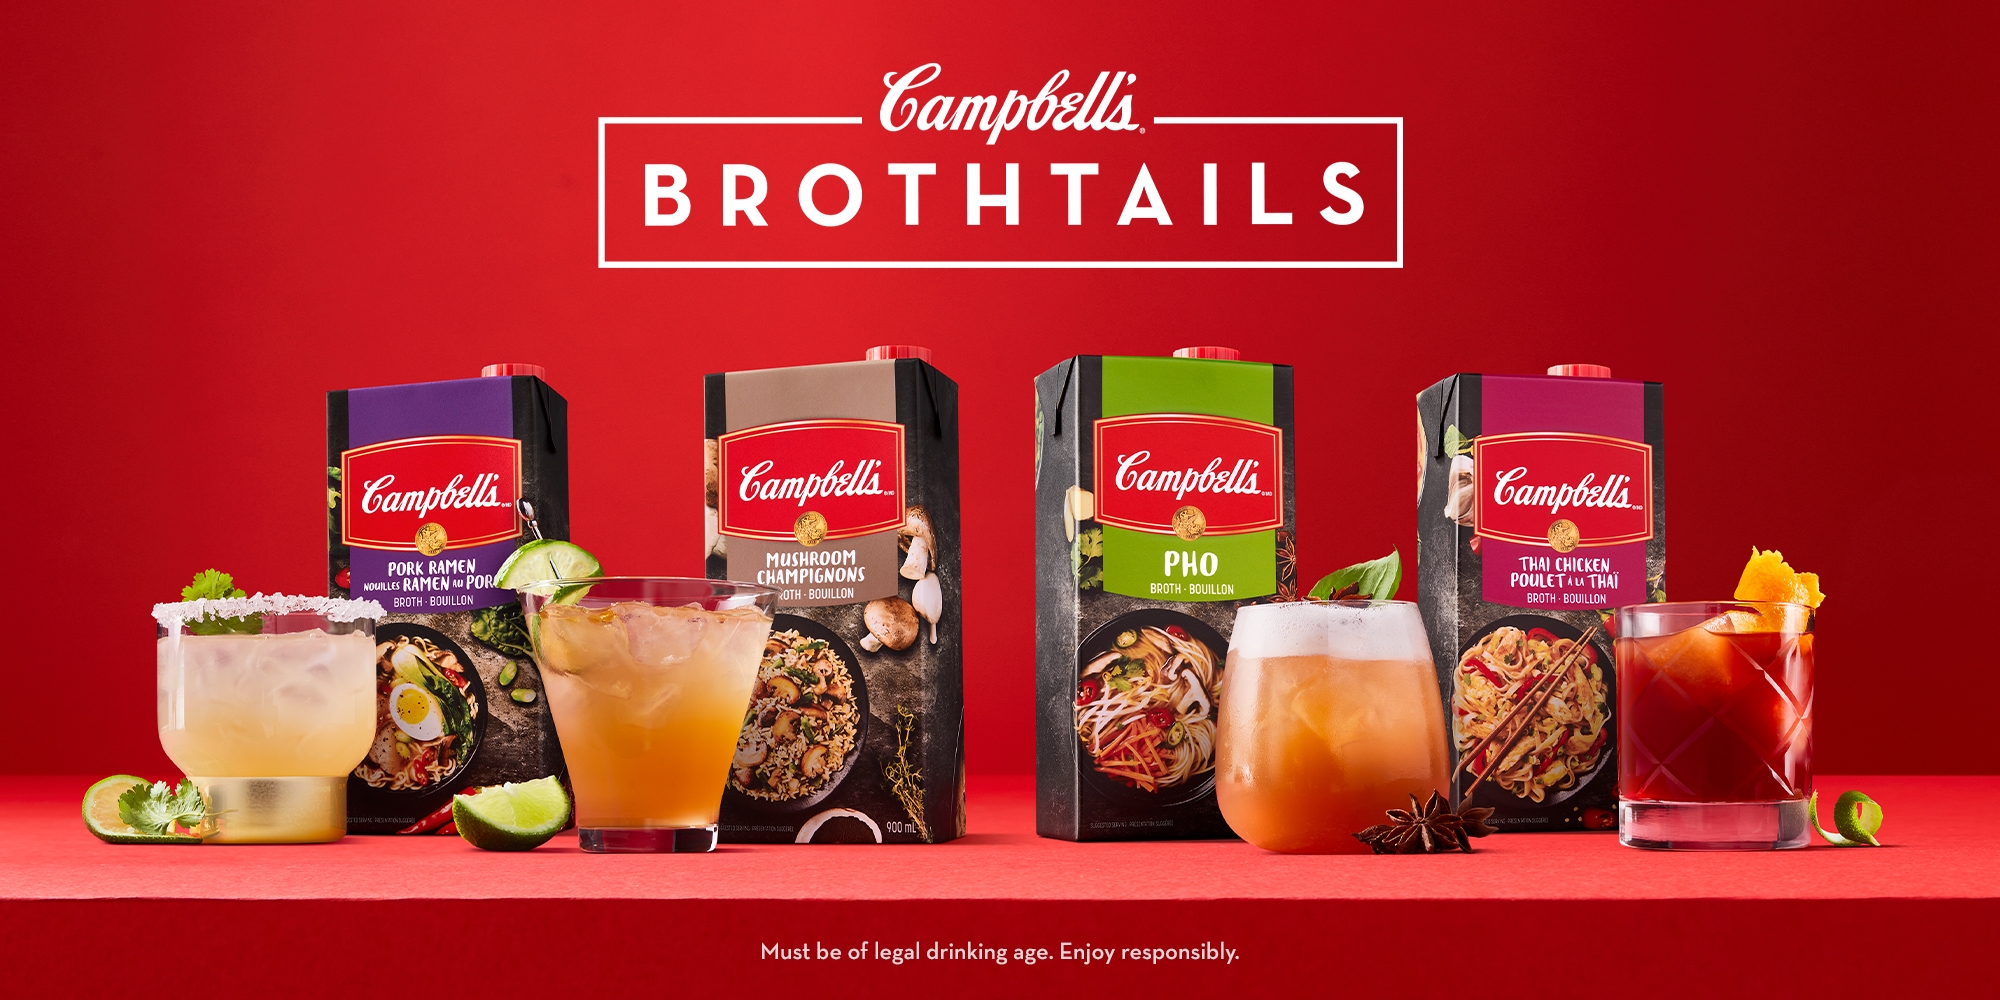 Campbell's Brothtails